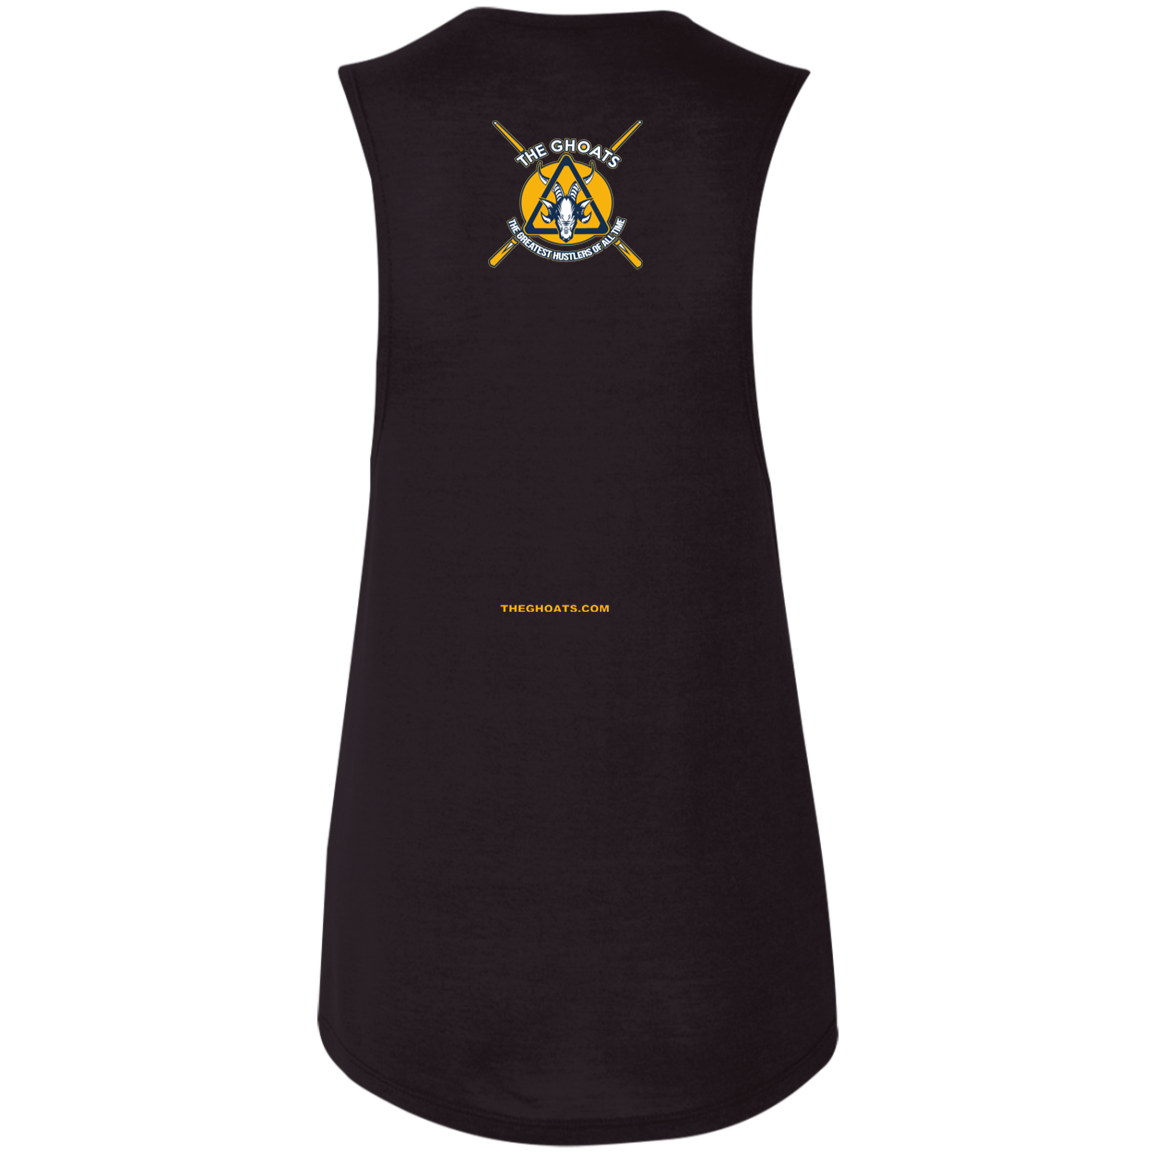 The GHOATS Custom Design. #6 Case by Case Scenario. Ladies' Flowy Muscle Tank